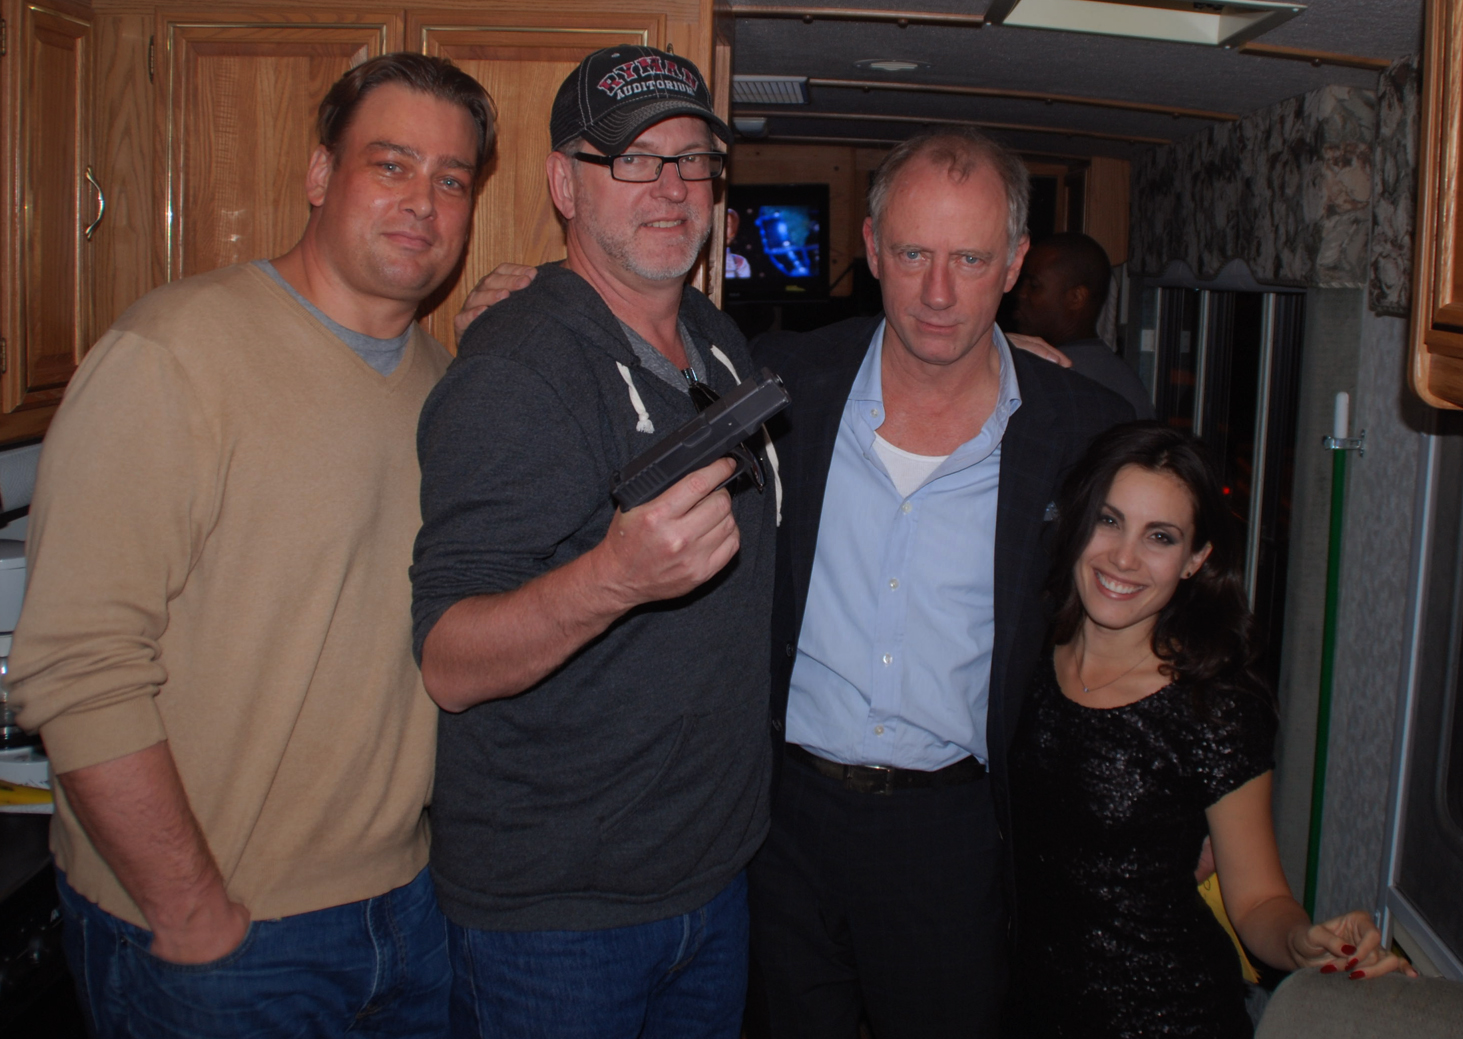 Executive Producer Robbert de Klerk on the set of 'This Last Lonely Place' with writer/director Steve Anderson and stars Xander Berkeley and Carly Pope